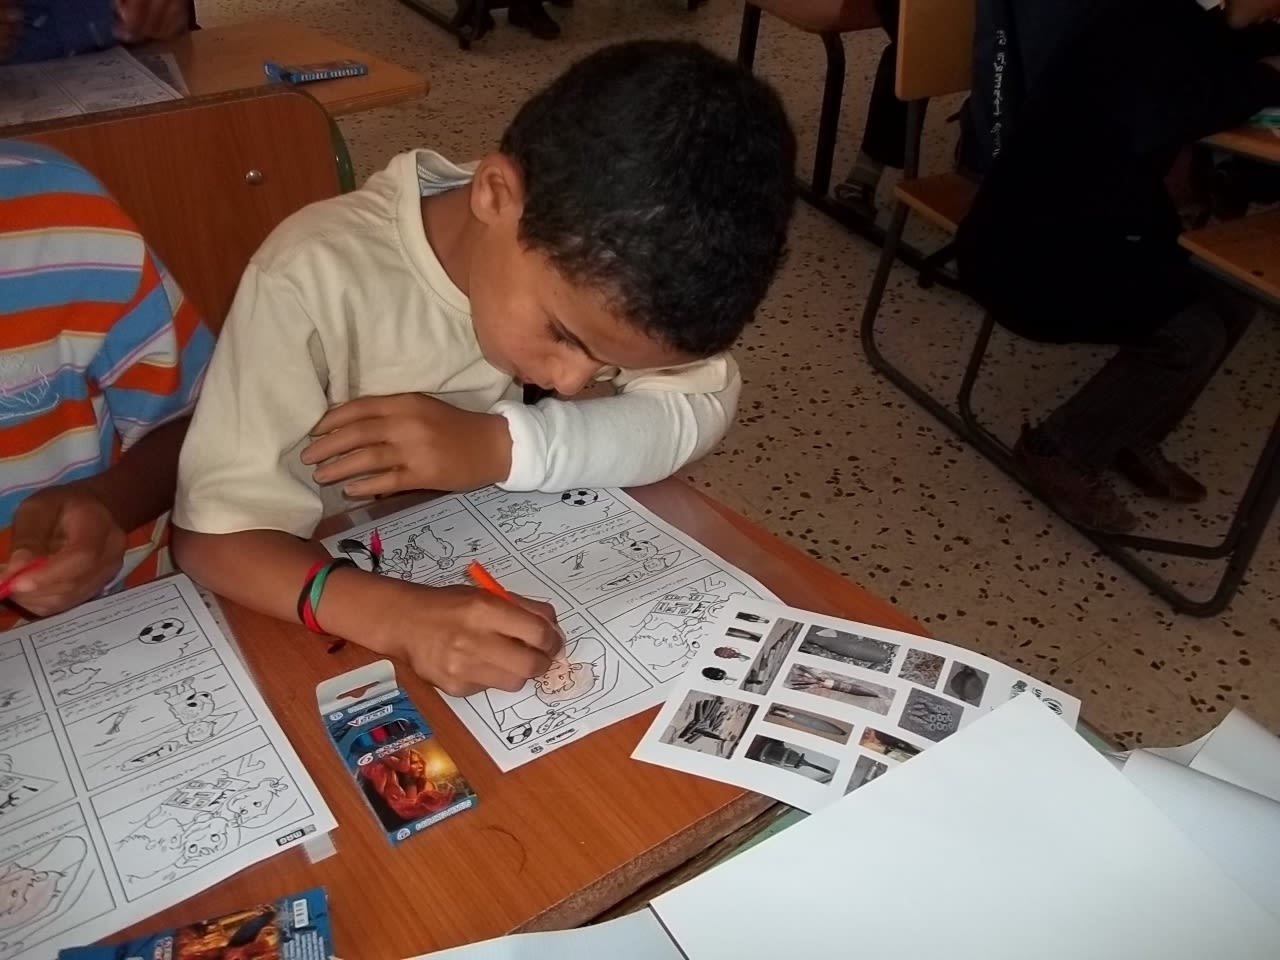 Mahmood with his new plastic hand, does coloring during a Risk Education session run by Mines Advisory Group.